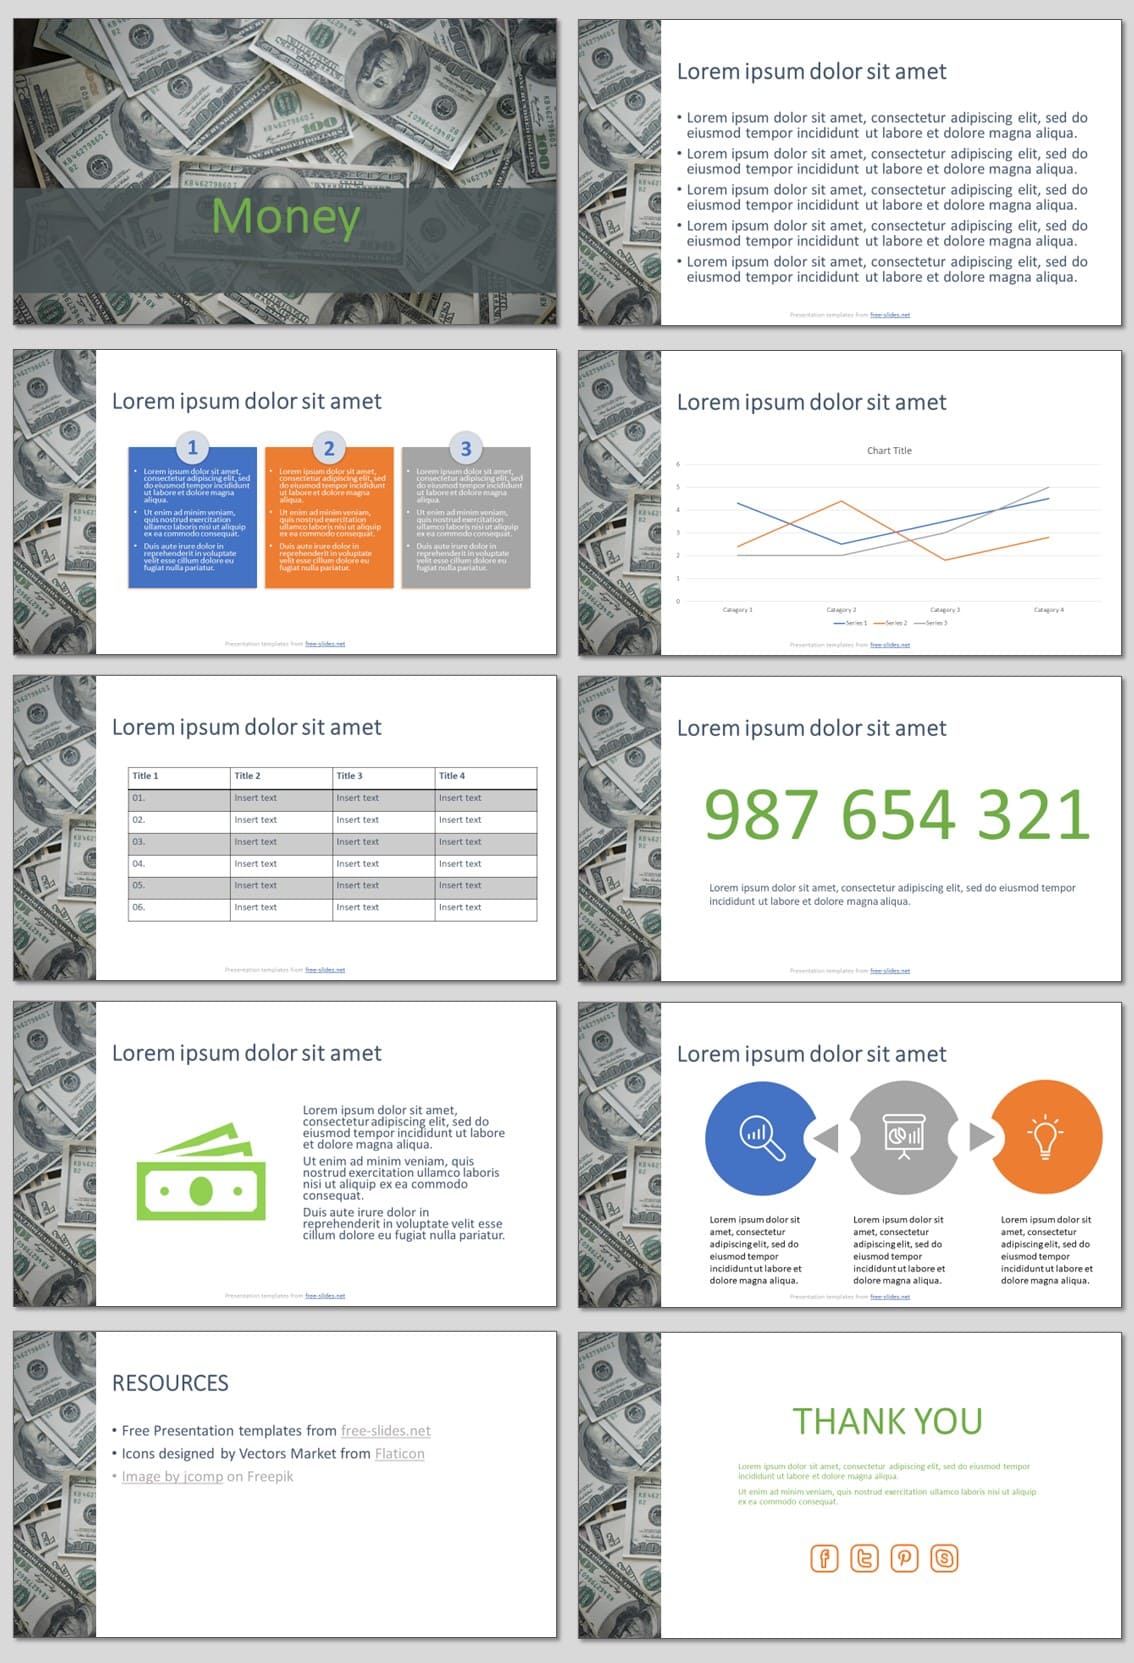 Money - Free PowerPoint Template and Google Slides Theme